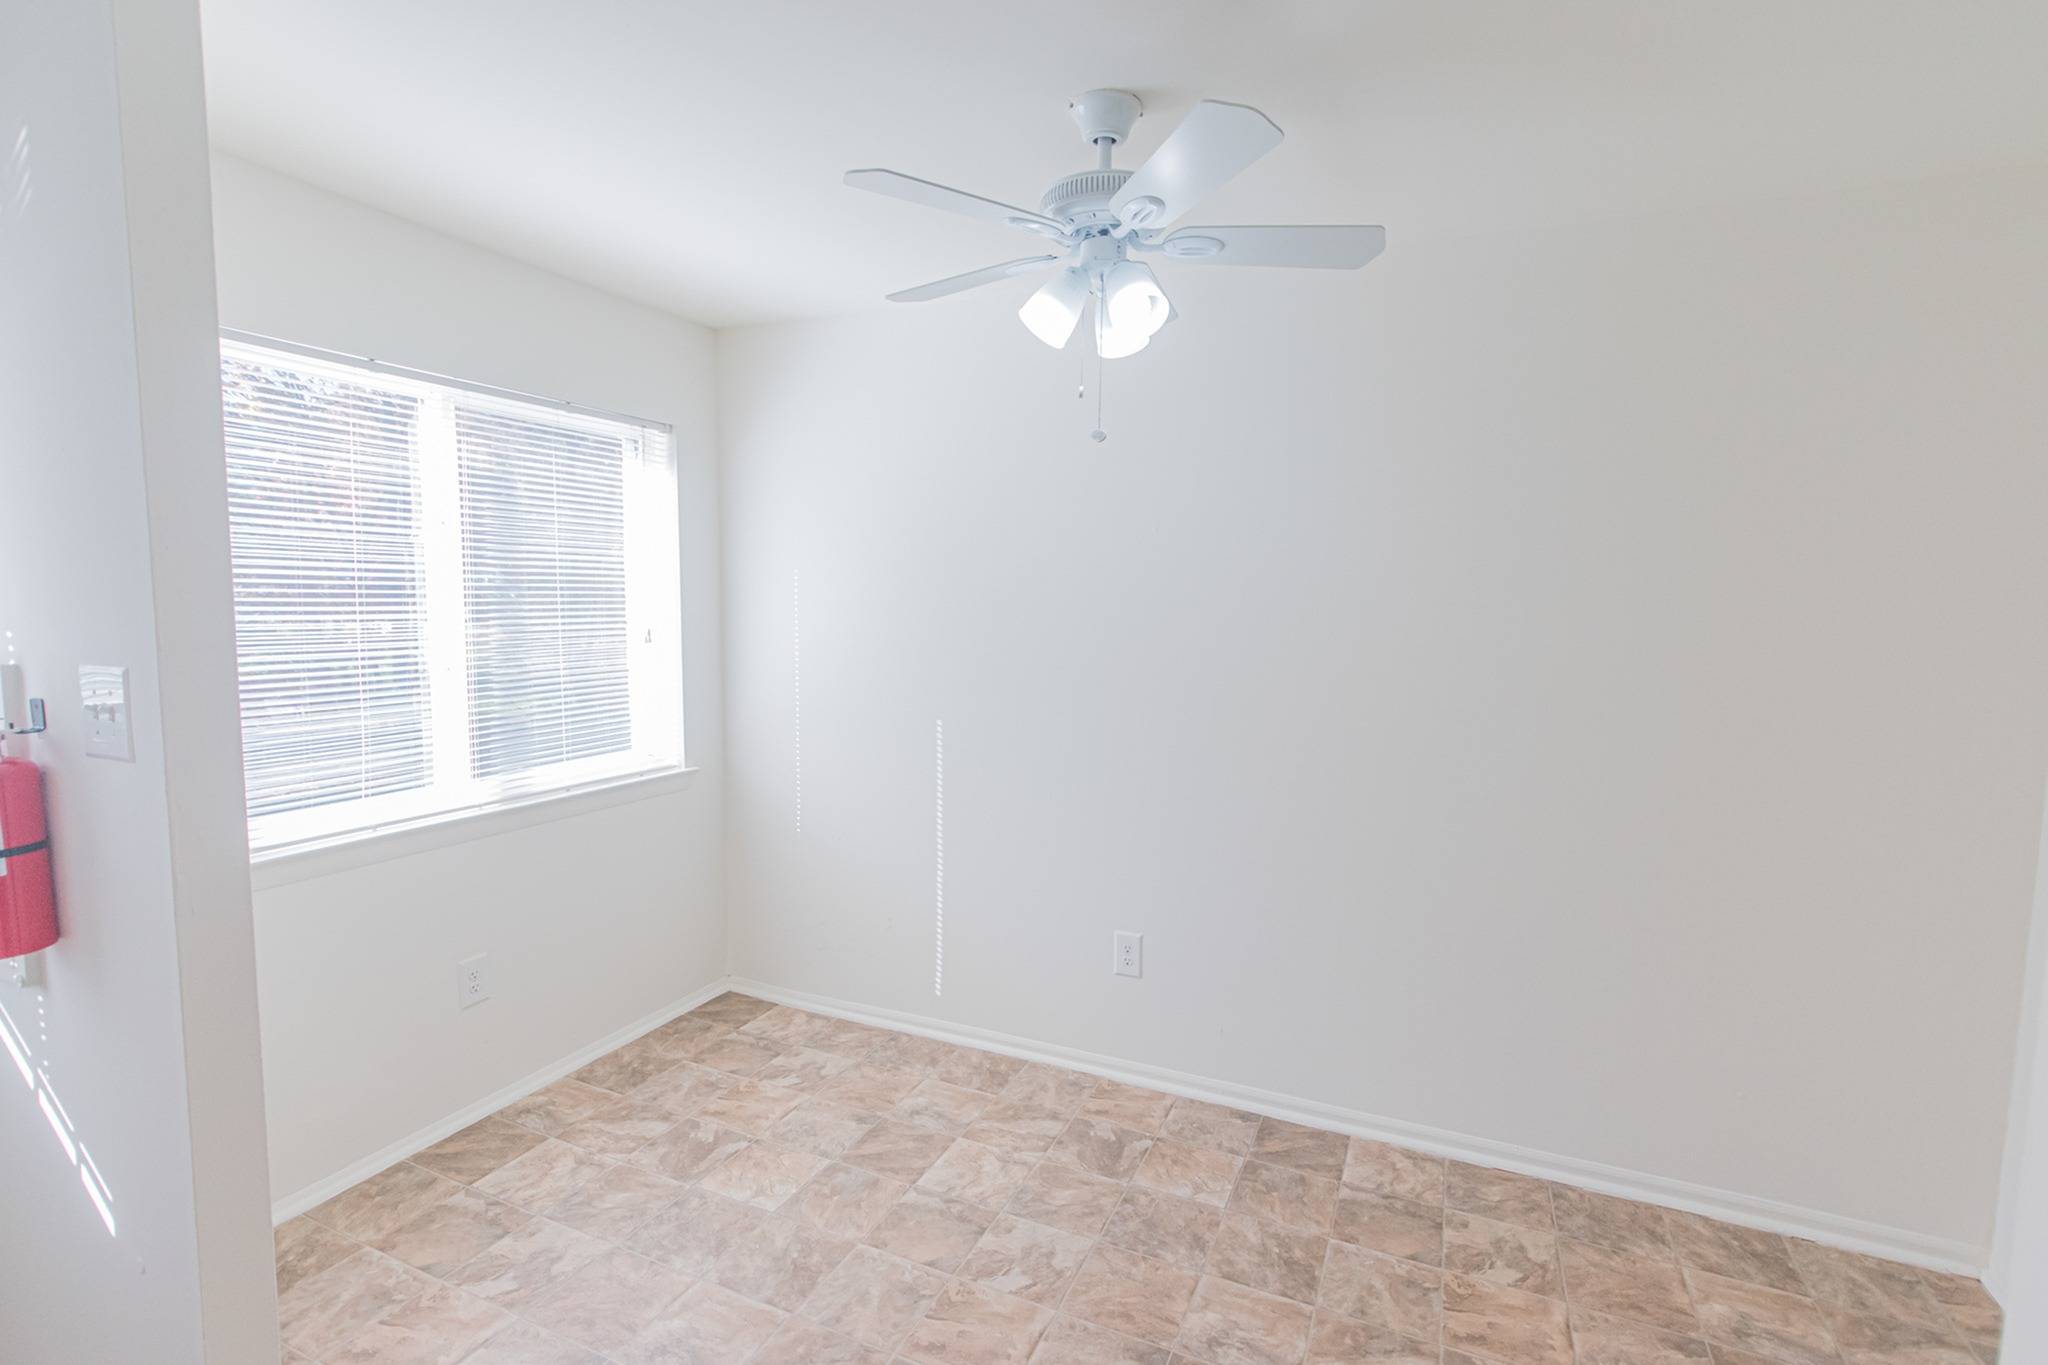 Rolling Glen Glen apartment tiled dining area with windows an a ceiling fan